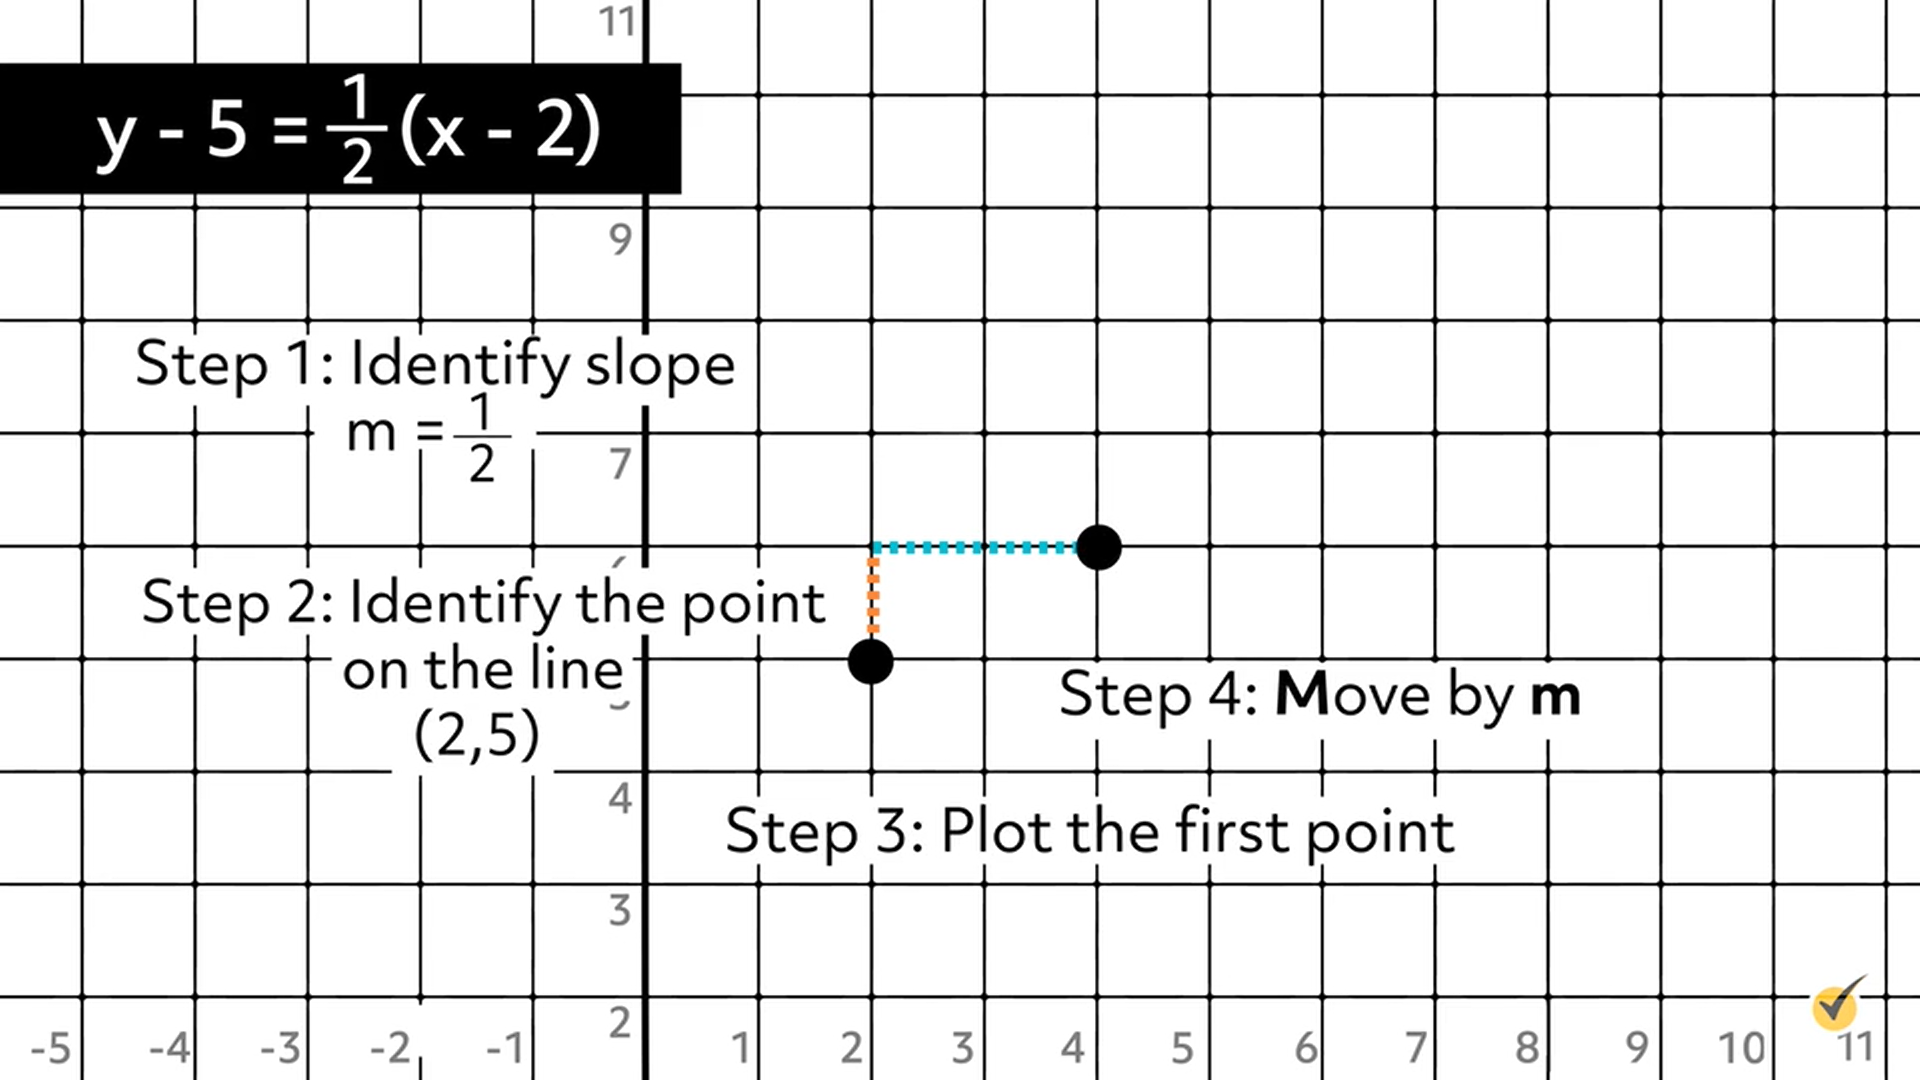 move by m=1/2